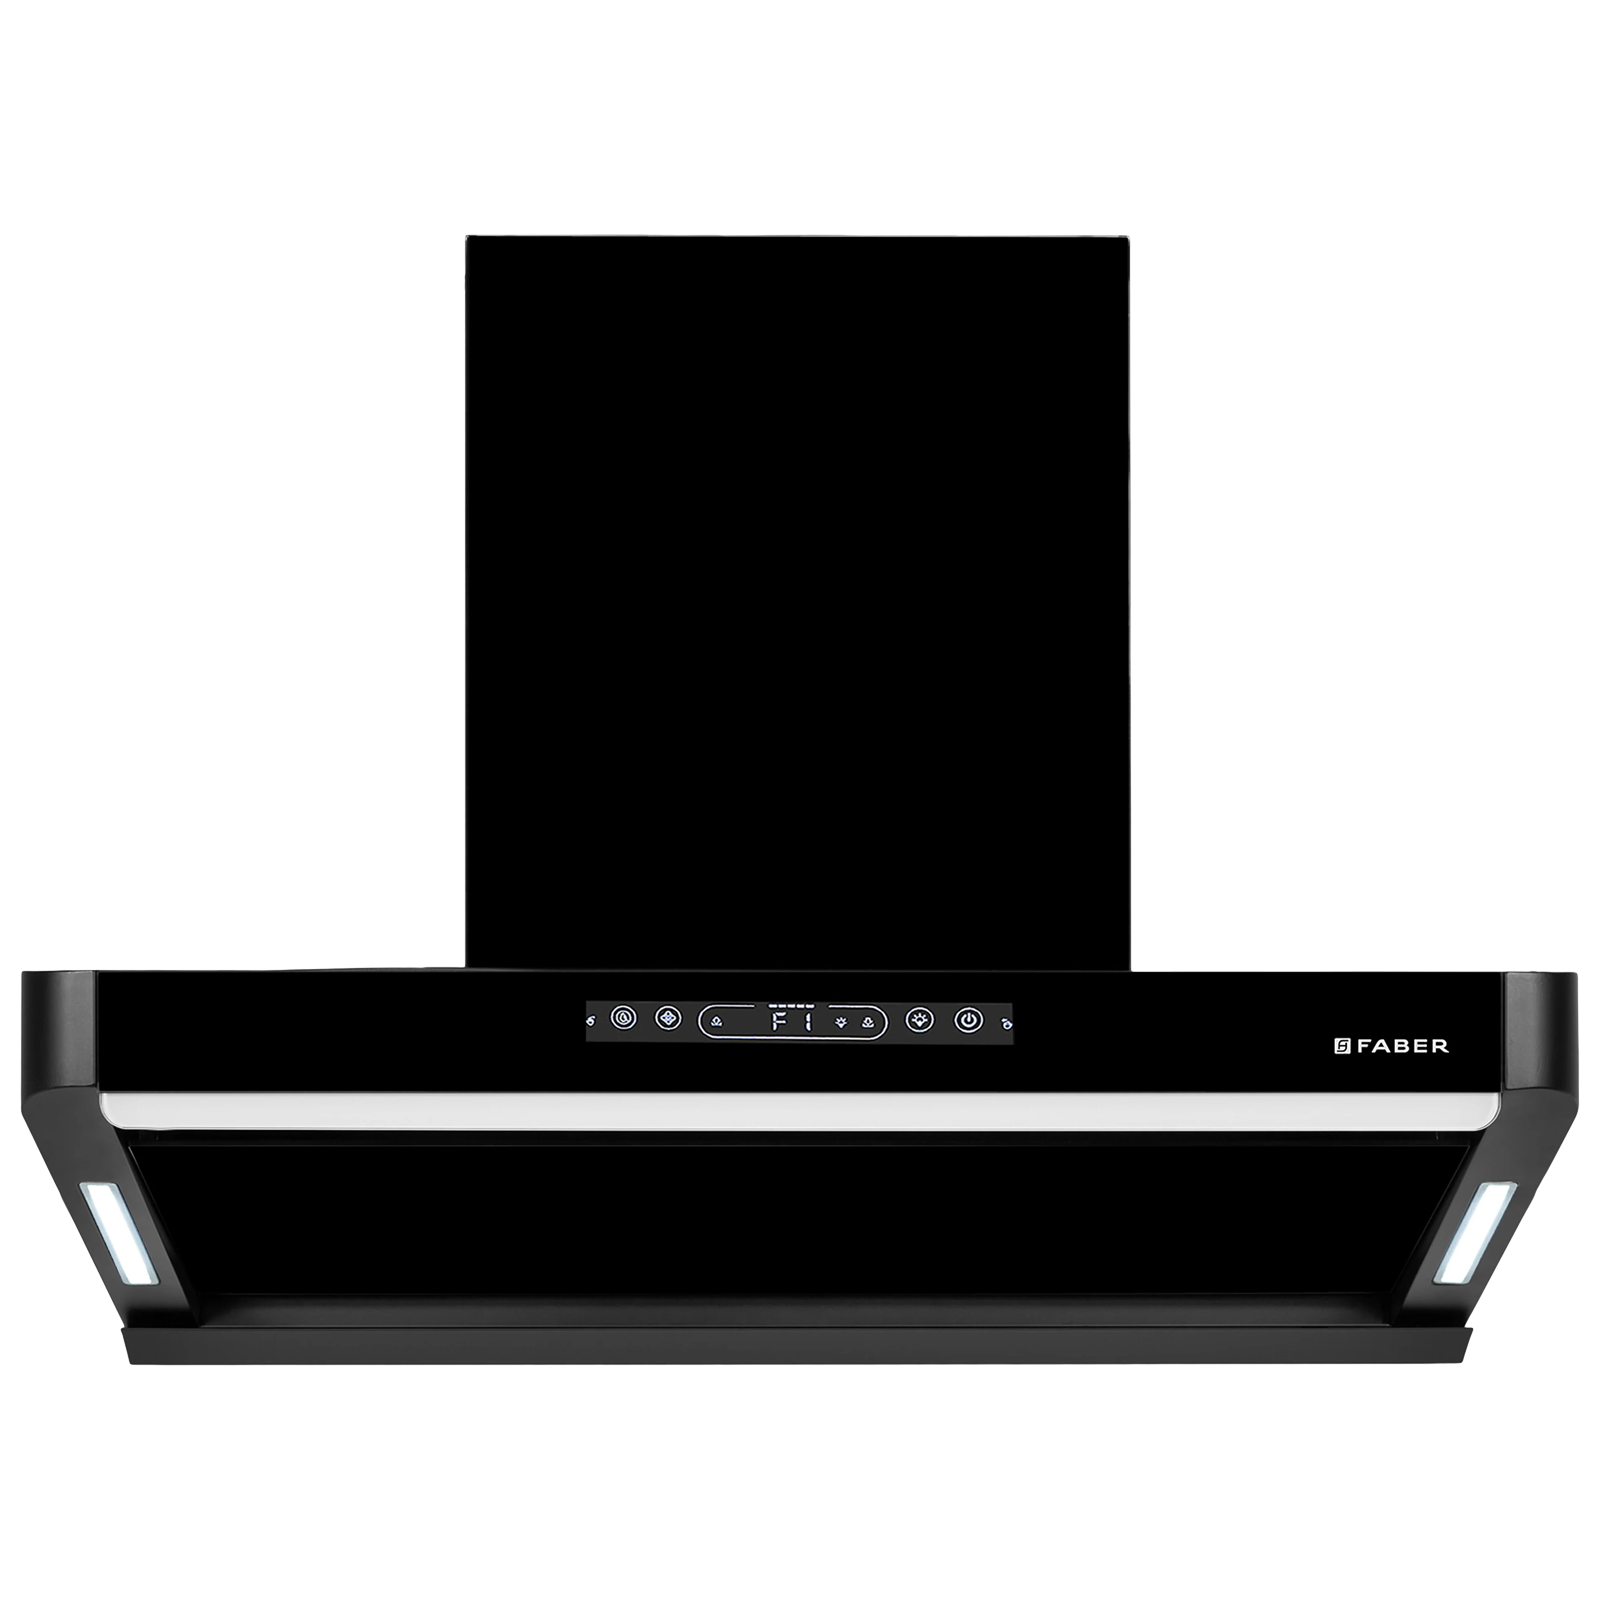 FABER Hood Pinnacle 90cm 1500m3/hr Ductless Auto Clean Wall Mounted Chimney with Touch and Gesture Control (Black)